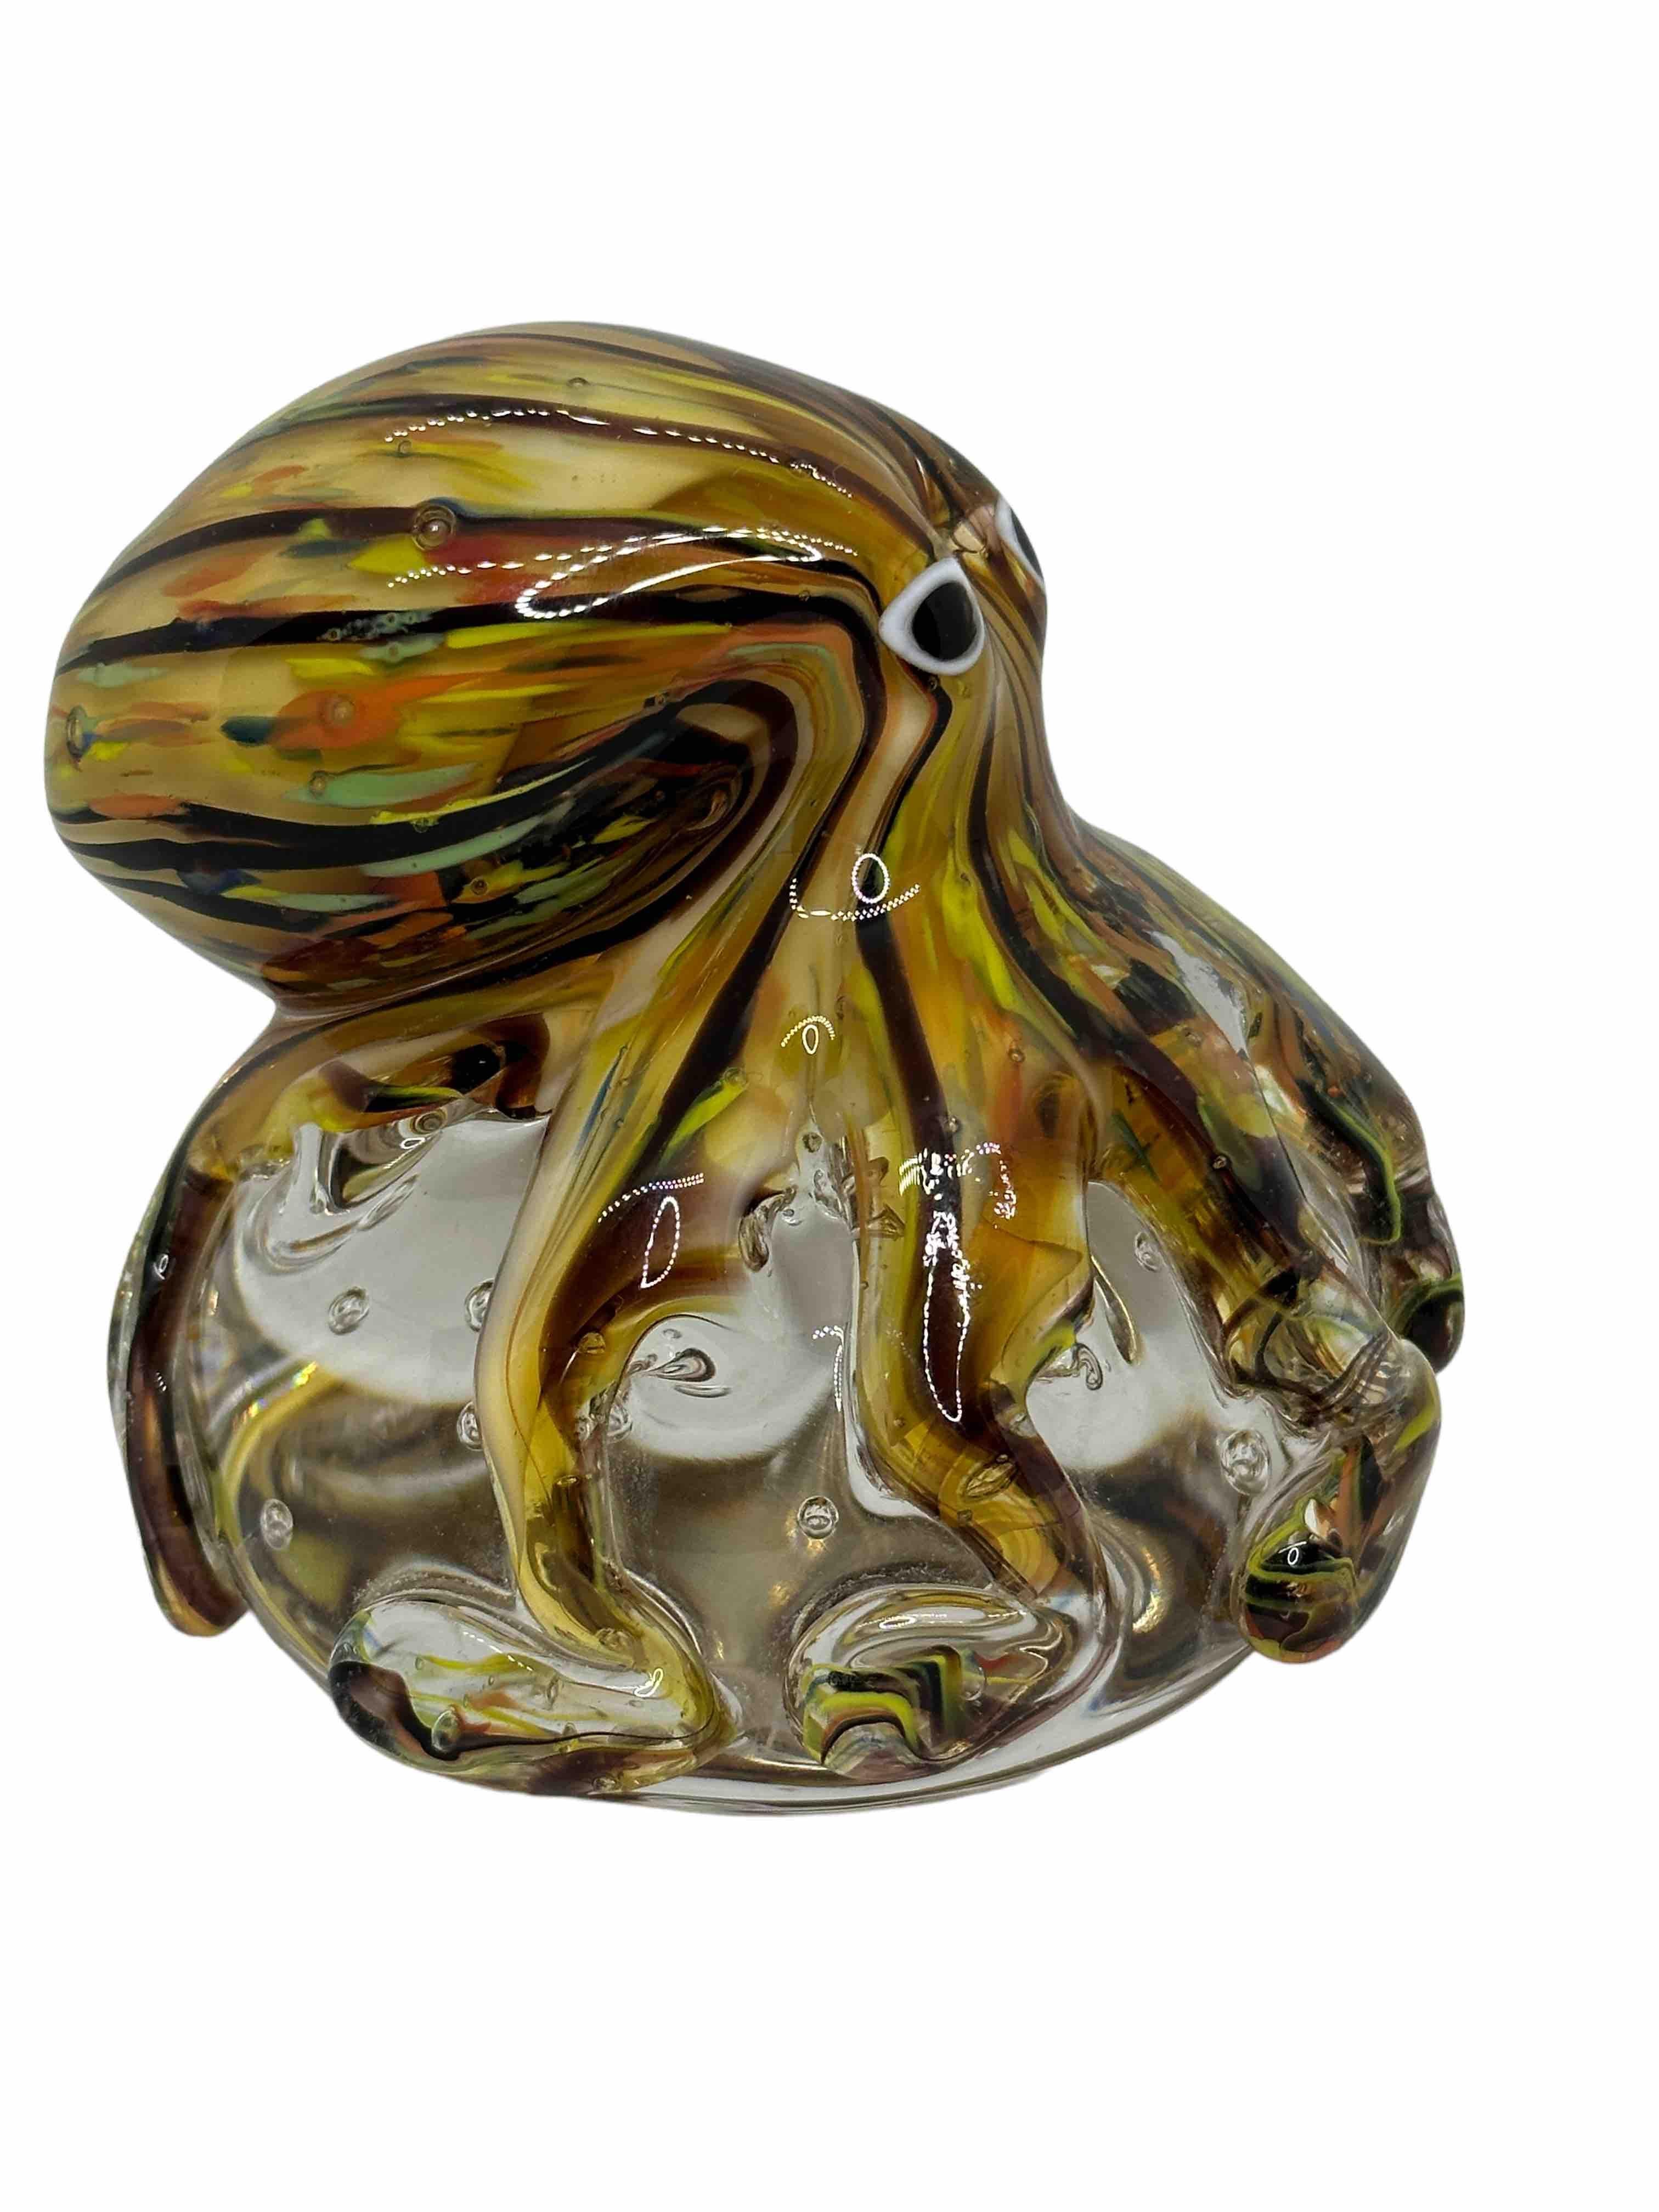 Beautiful Murano hand blown aquarium Italian art glass paper weight. Showing a giant octopuses, on a glass bubble floating on controlled bubbles. Colors are a blue, yellow, orange and clear. A beautiful nice addition to your desktop or as a